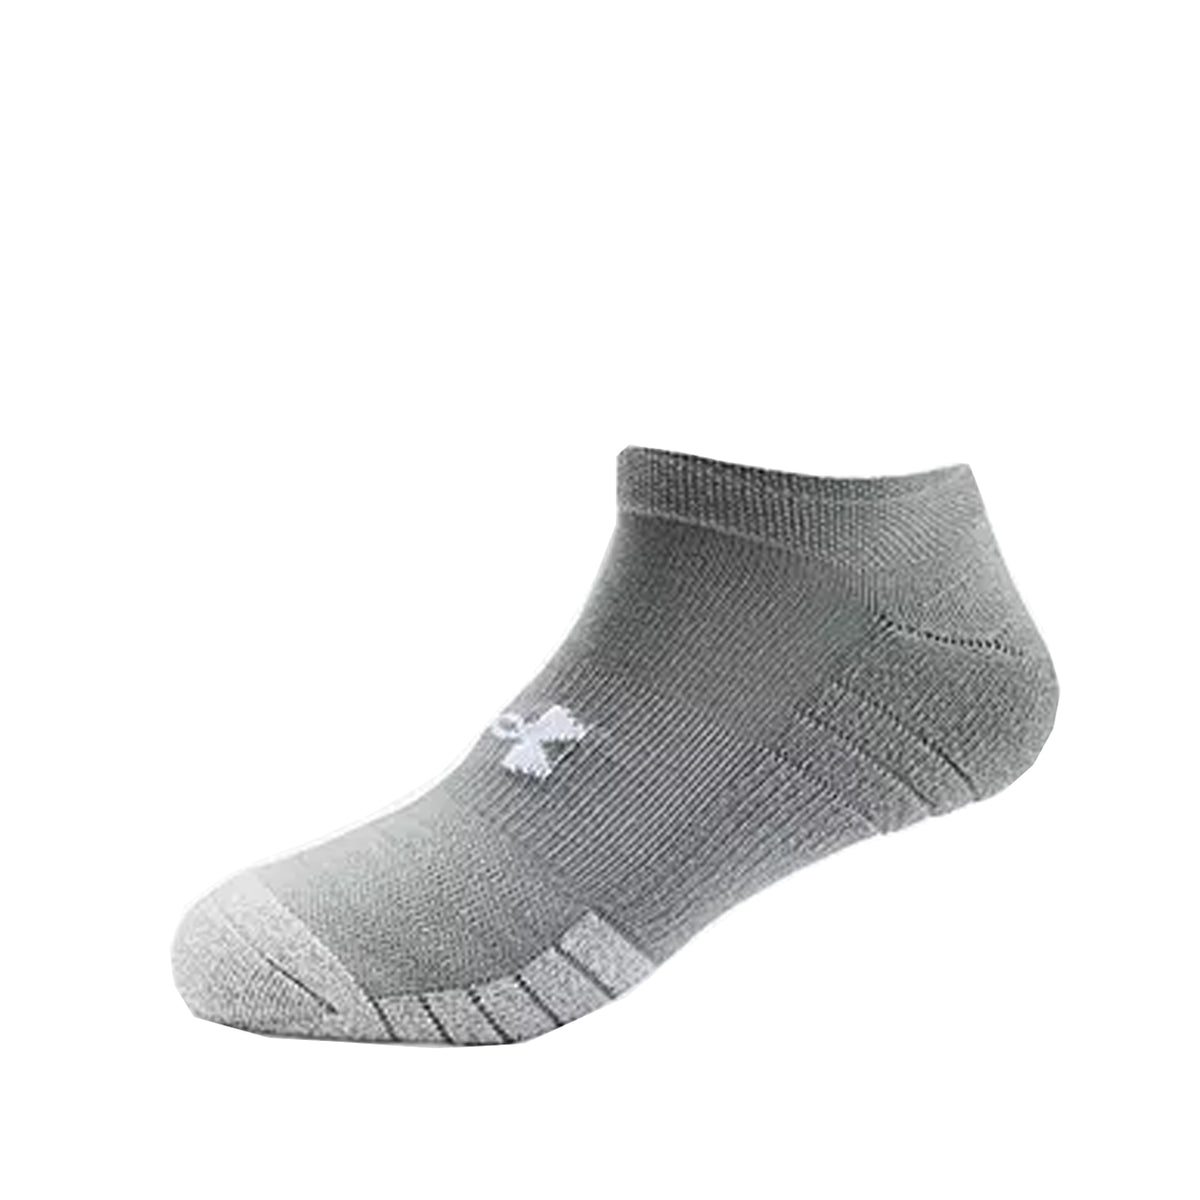 Under Armour No Show Socks 3 Pack: Grey